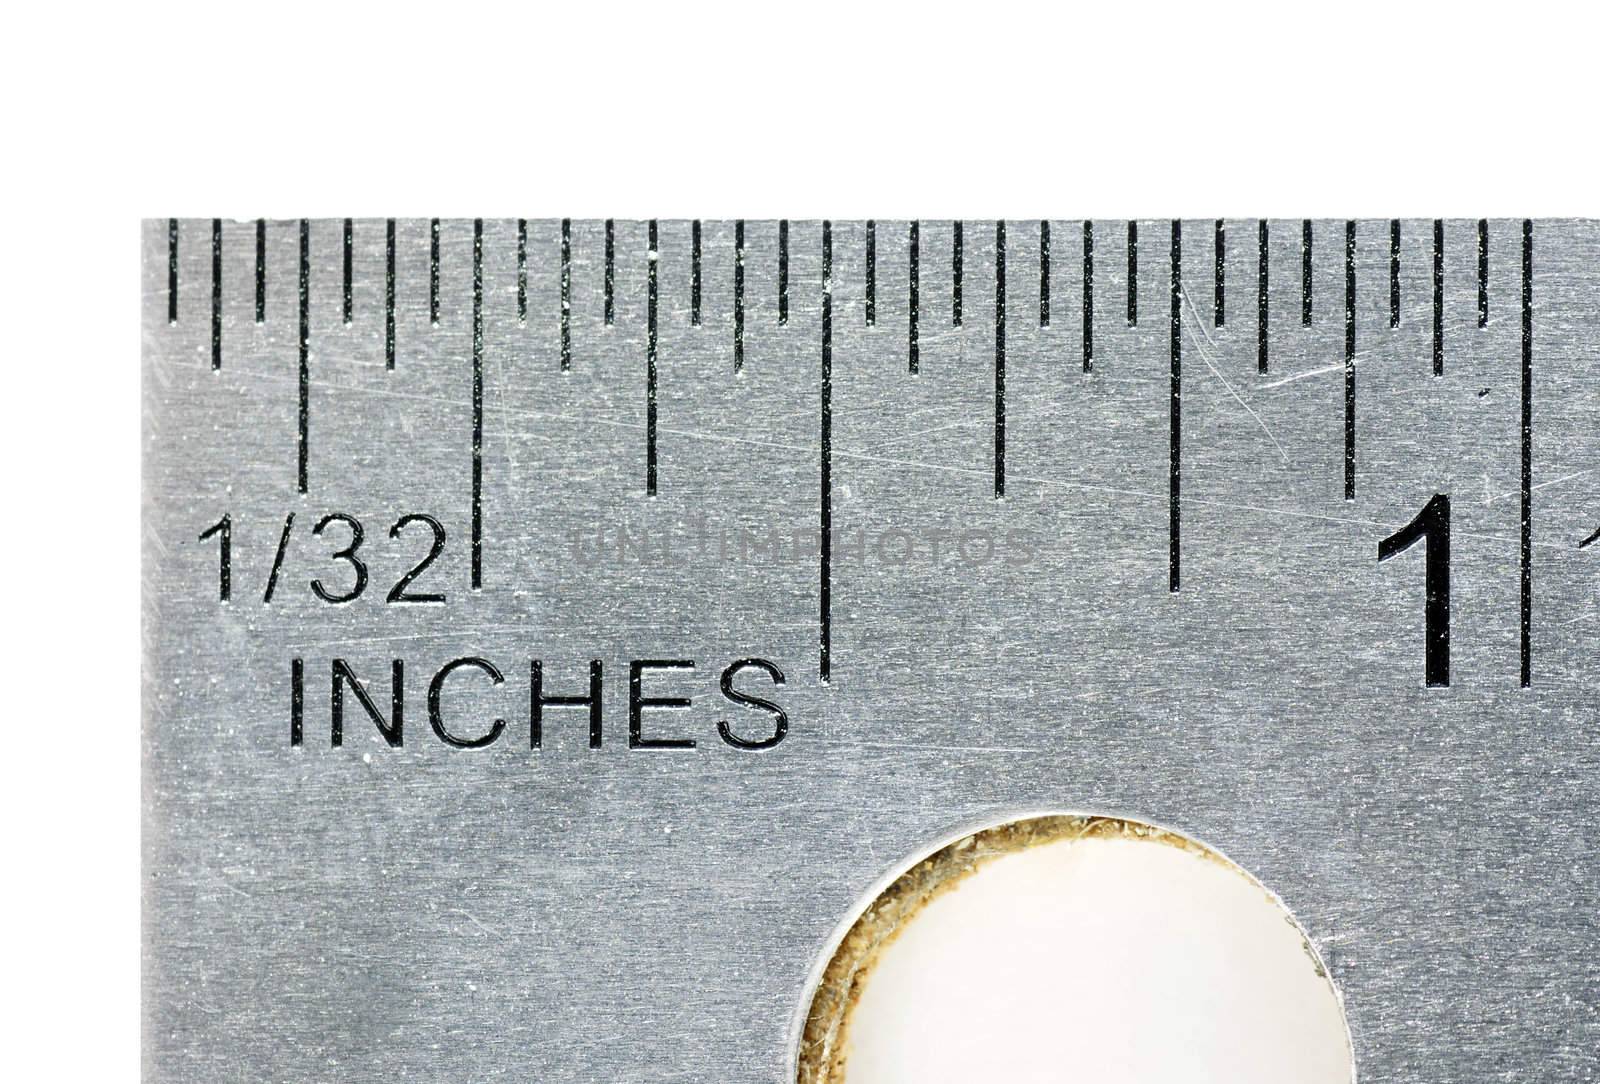 Imperial stainless steel ruler by Mirage3